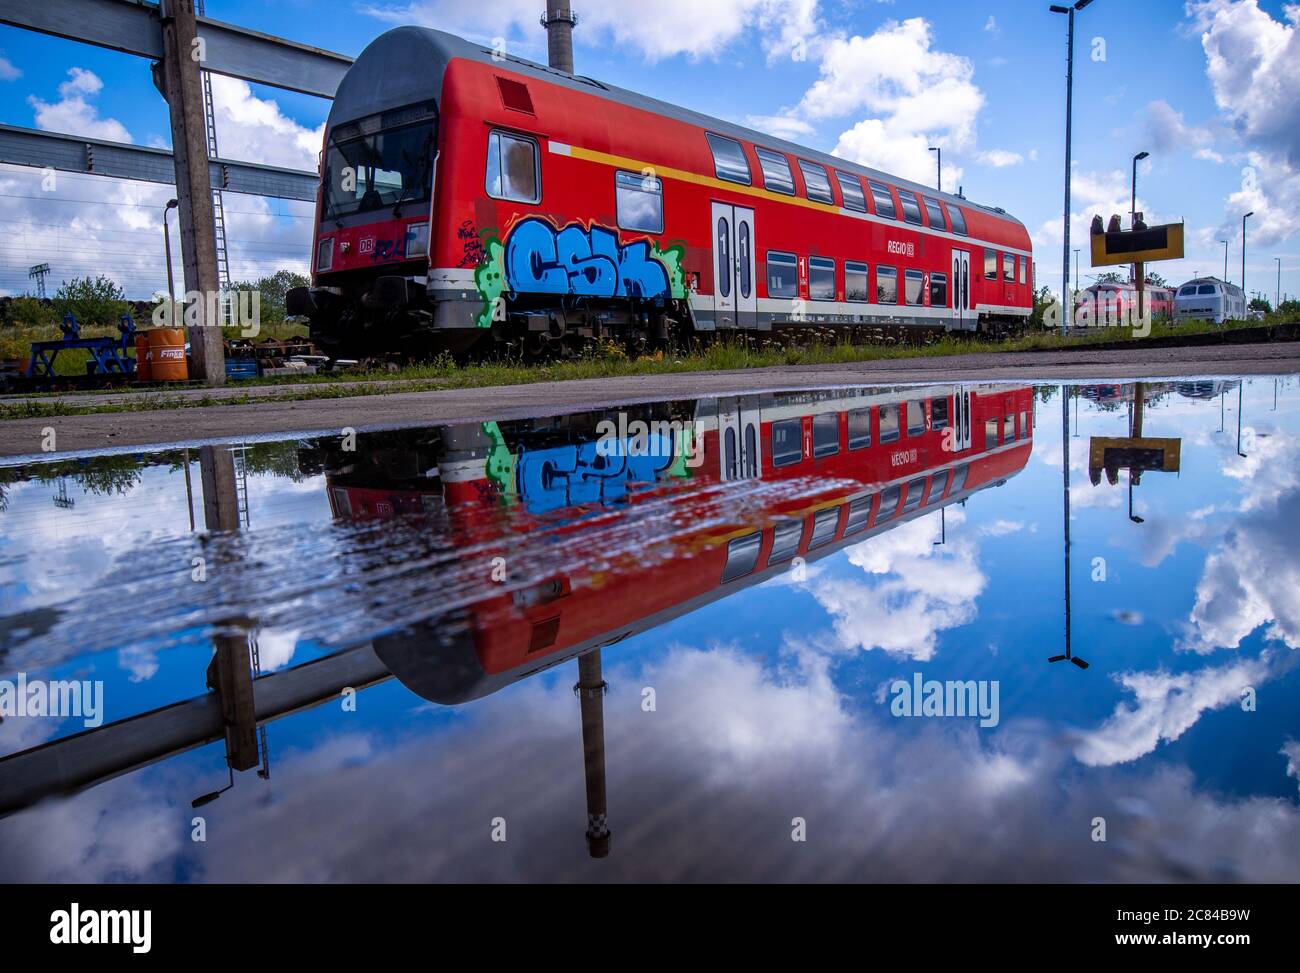 16 July 2020, Mecklenburg-Western Pomerania, Mukran: A double-decker passenger coach stands in front of the repair workshop of Baltic Port Services GmbH (BPS) and is reflected in a puddle. In the workshop, which was opened by Deutsche Reichsbahn in 1986, rail vehicles coming from the railway ferry were re-gauged from the 1520 millimetre wide Russian broad gauge to the standard track used in the rest of Europe. The workshop, which was taken over in 2014 by today's company Enon, based in Putlitz, Brandenburg, reconditions old locomotives and railway carriages for use by private railway companies Stock Photo